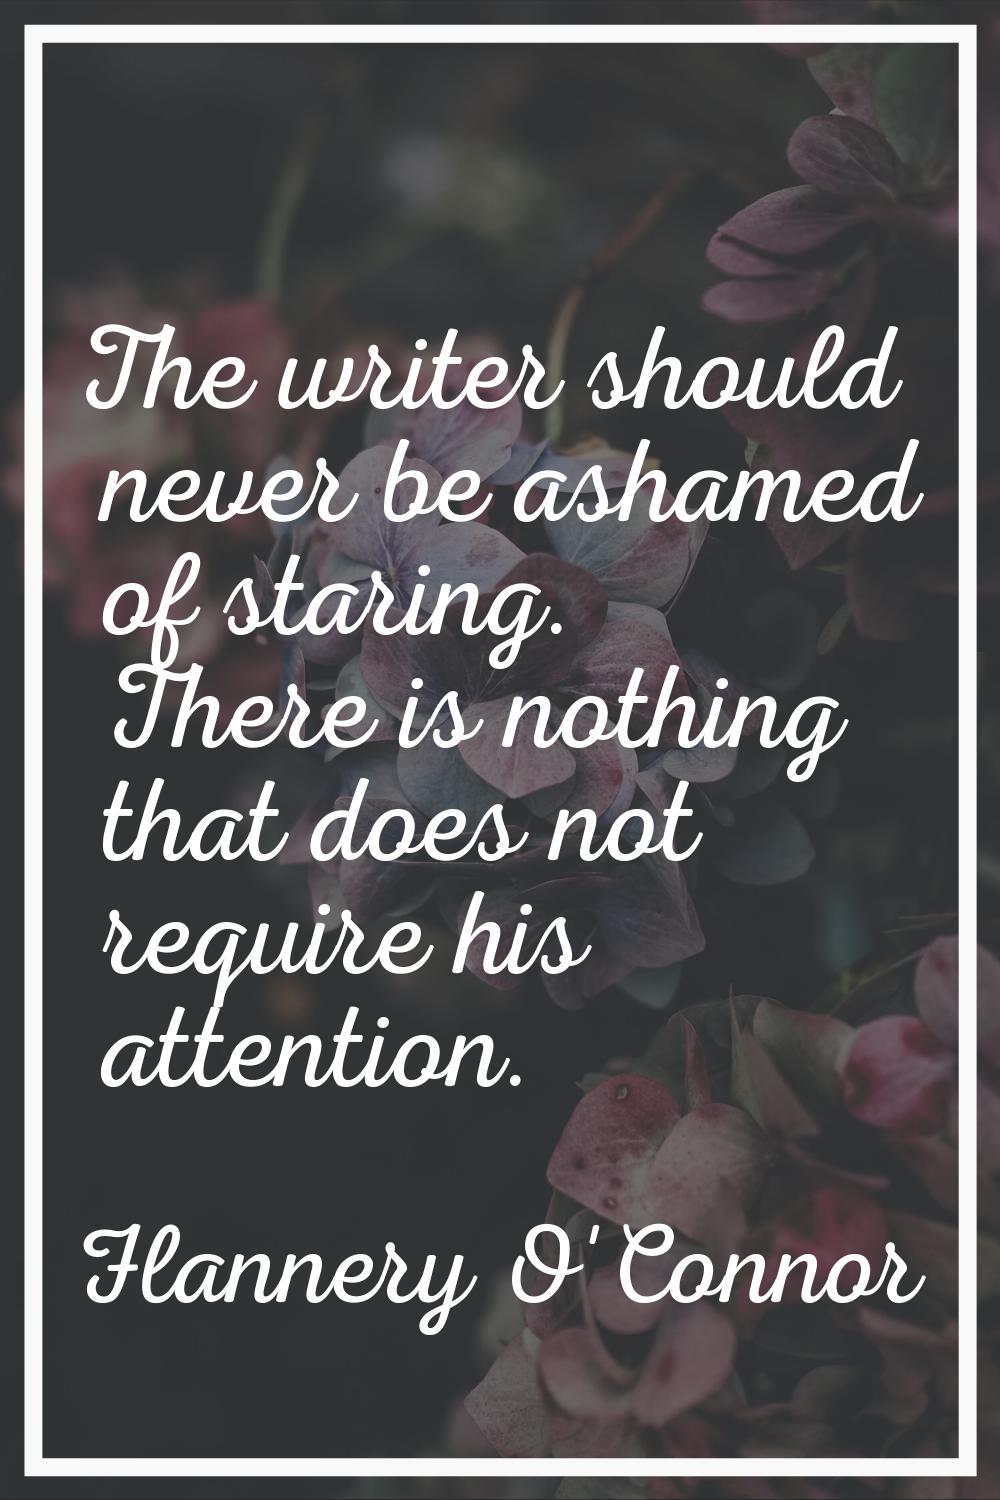 The writer should never be ashamed of staring. There is nothing that does not require his attention